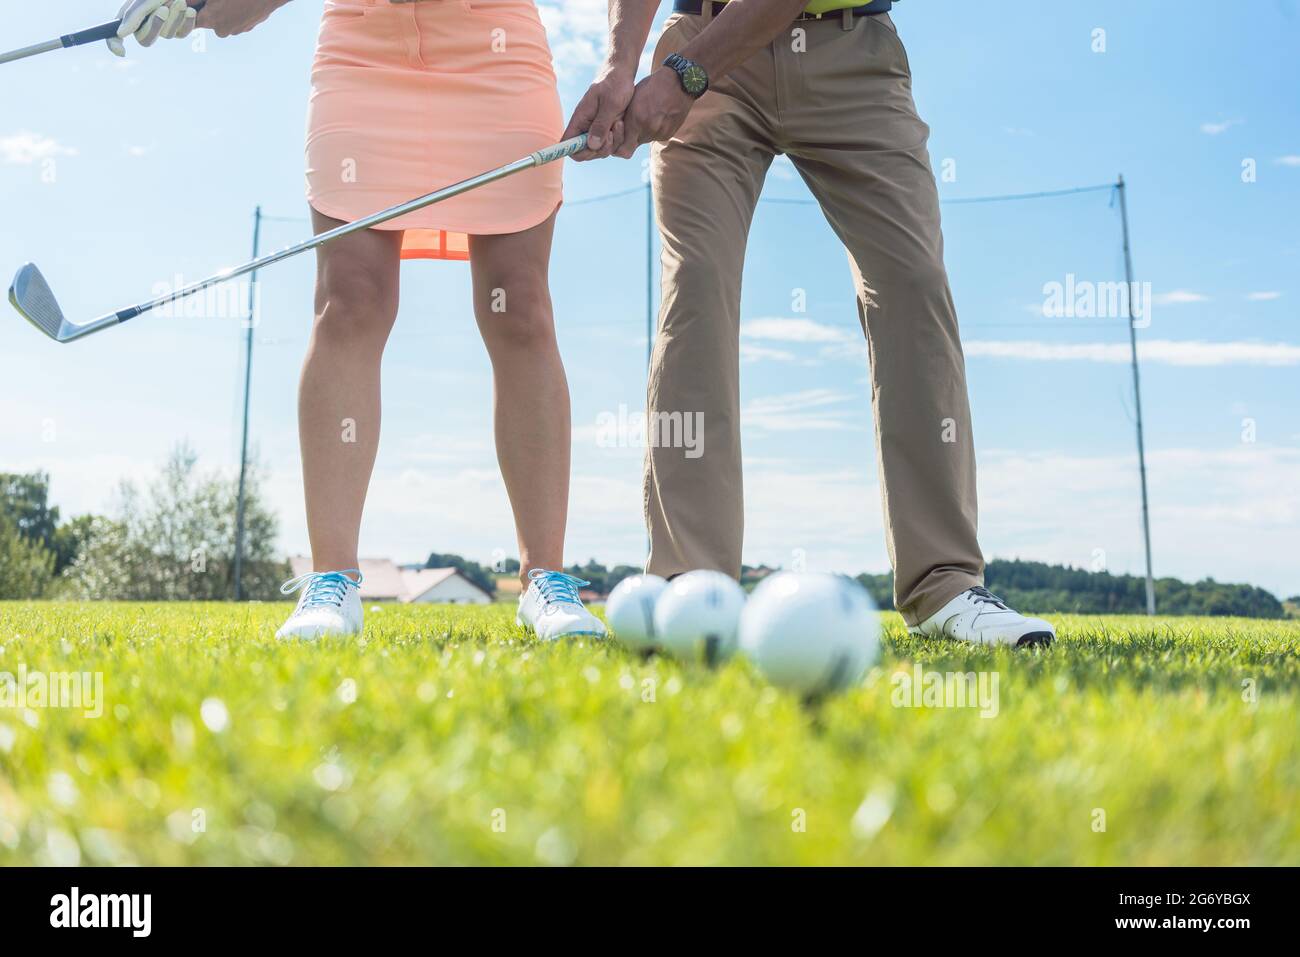 Low section of man and woman holding iron clubs, while practicing together the correct grip and move for playing golf on the green grass of a professi Stock Photo